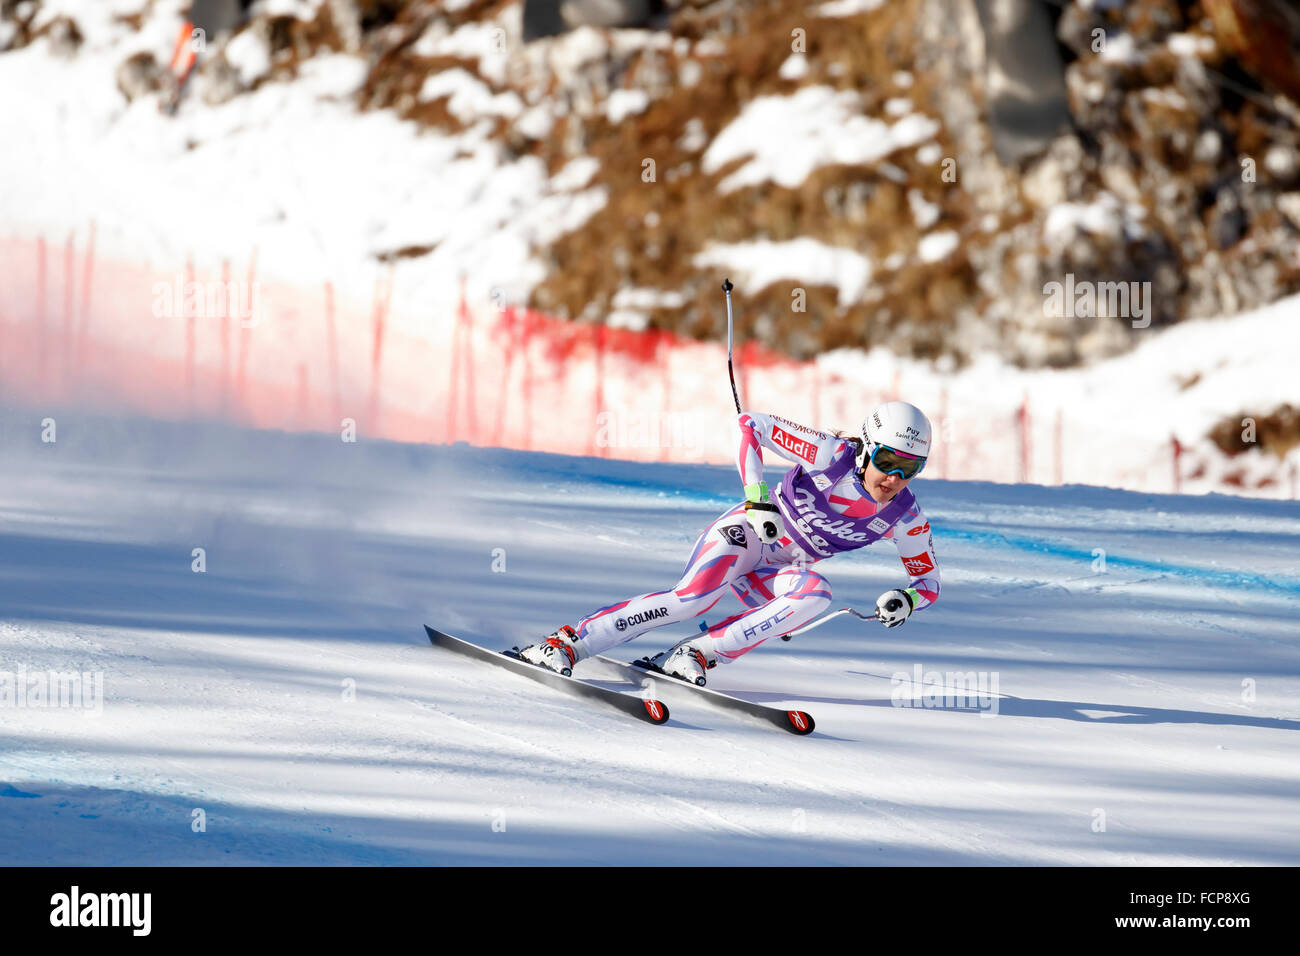 Cortina d’Ampezzo, Italy 23 January 2016. BESSY Anouk (Fra) competing in the Audi Fis Alpine Skiing World Cup Women’s downhill Race on the Olympia Course in the dolomite mountain range. Credit:  MAURO DALLA POZZA/Alamy Live News Stock Photo